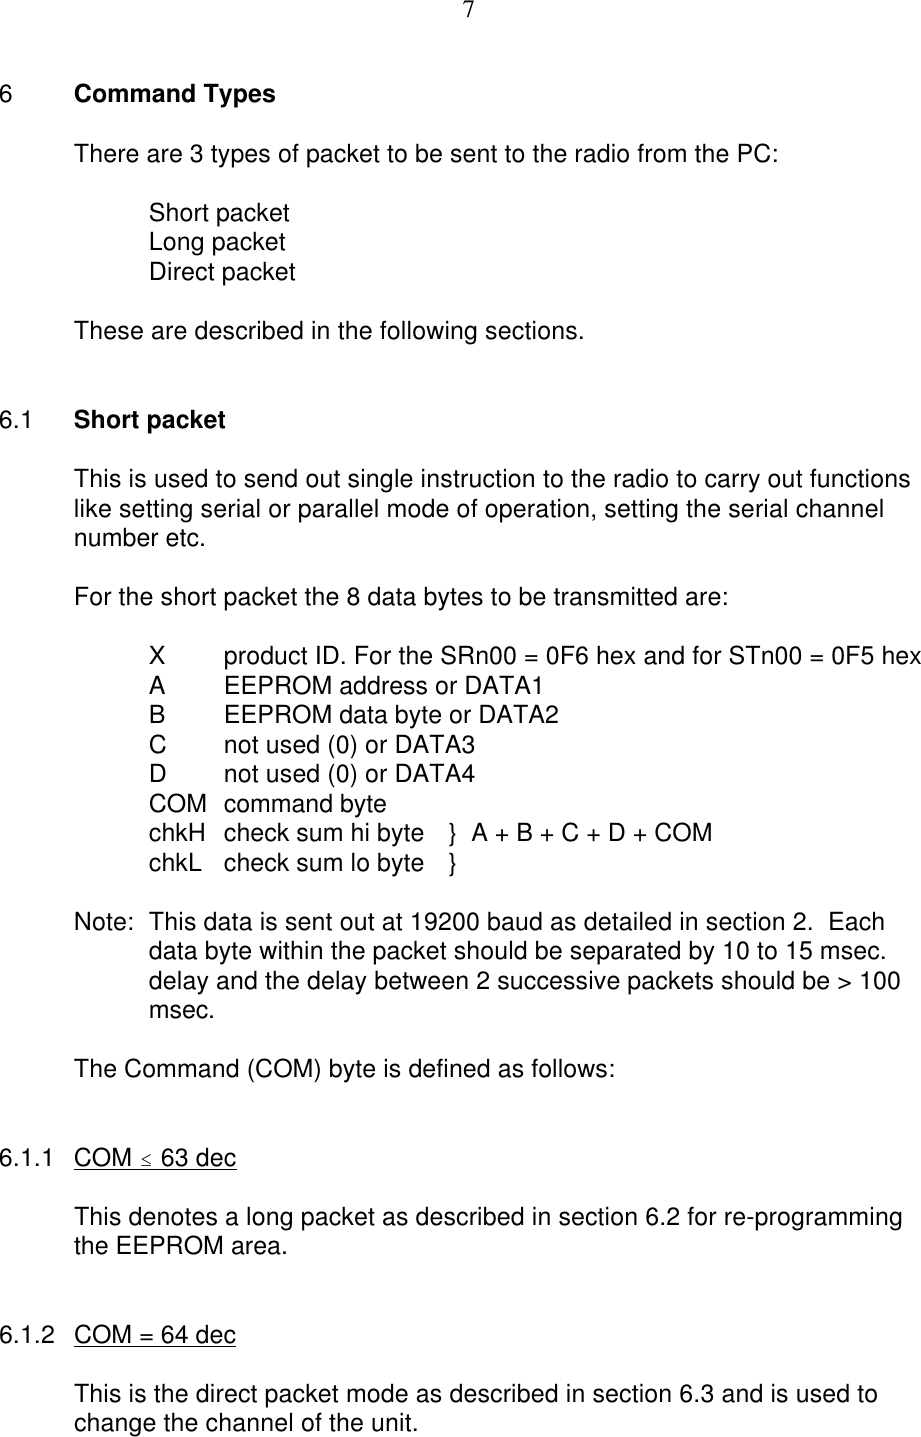 76Command TypesThere are 3 types of packet to be sent to the radio from the PC:Short packetLong packetDirect packetThese are described in the following sections.6.1 Short packetThis is used to send out single instruction to the radio to carry out functionslike setting serial or parallel mode of operation, setting the serial channelnumber etc.For the short packet the 8 data bytes to be transmitted are:Xproduct ID. For the SRn00 = 0F6 hex and for STn00 = 0F5 hexAEEPROM address or DATA1BEEPROM data byte or DATA2Cnot used (0) or DATA3Dnot used (0) or DATA4COM command byte chkH check sum hi byte  }  A + B + C + D + COMchkL check sum lo byte  }Note: This data is sent out at 19200 baud as detailed in section 2.  Eachdata byte within the packet should be separated by 10 to 15 msec.delay and the delay between 2 successive packets should be &gt; 100msec.The Command (COM) byte is defined as follows:6.1.1 COM # 63 decThis denotes a long packet as described in section 6.2 for re-programmingthe EEPROM area.6.1.2 COM = 64 decThis is the direct packet mode as described in section 6.3 and is used tochange the channel of the unit.